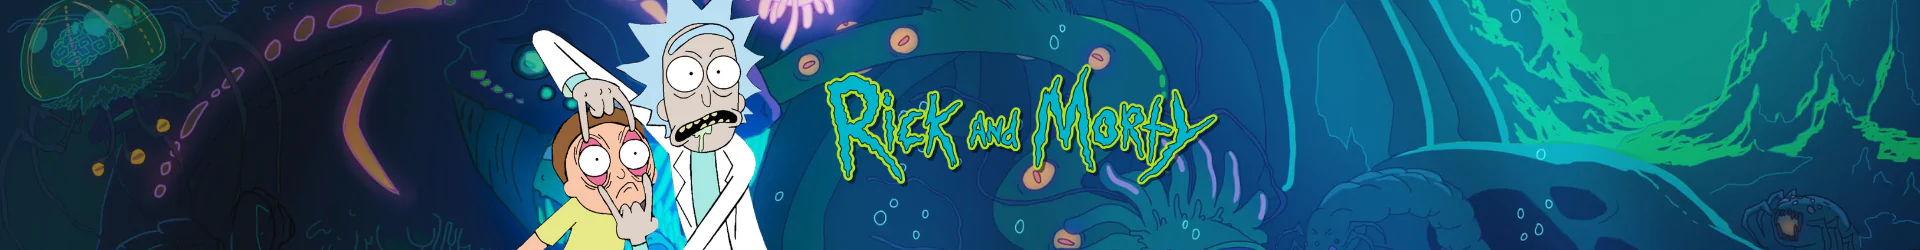 Rick and Morty board games banner